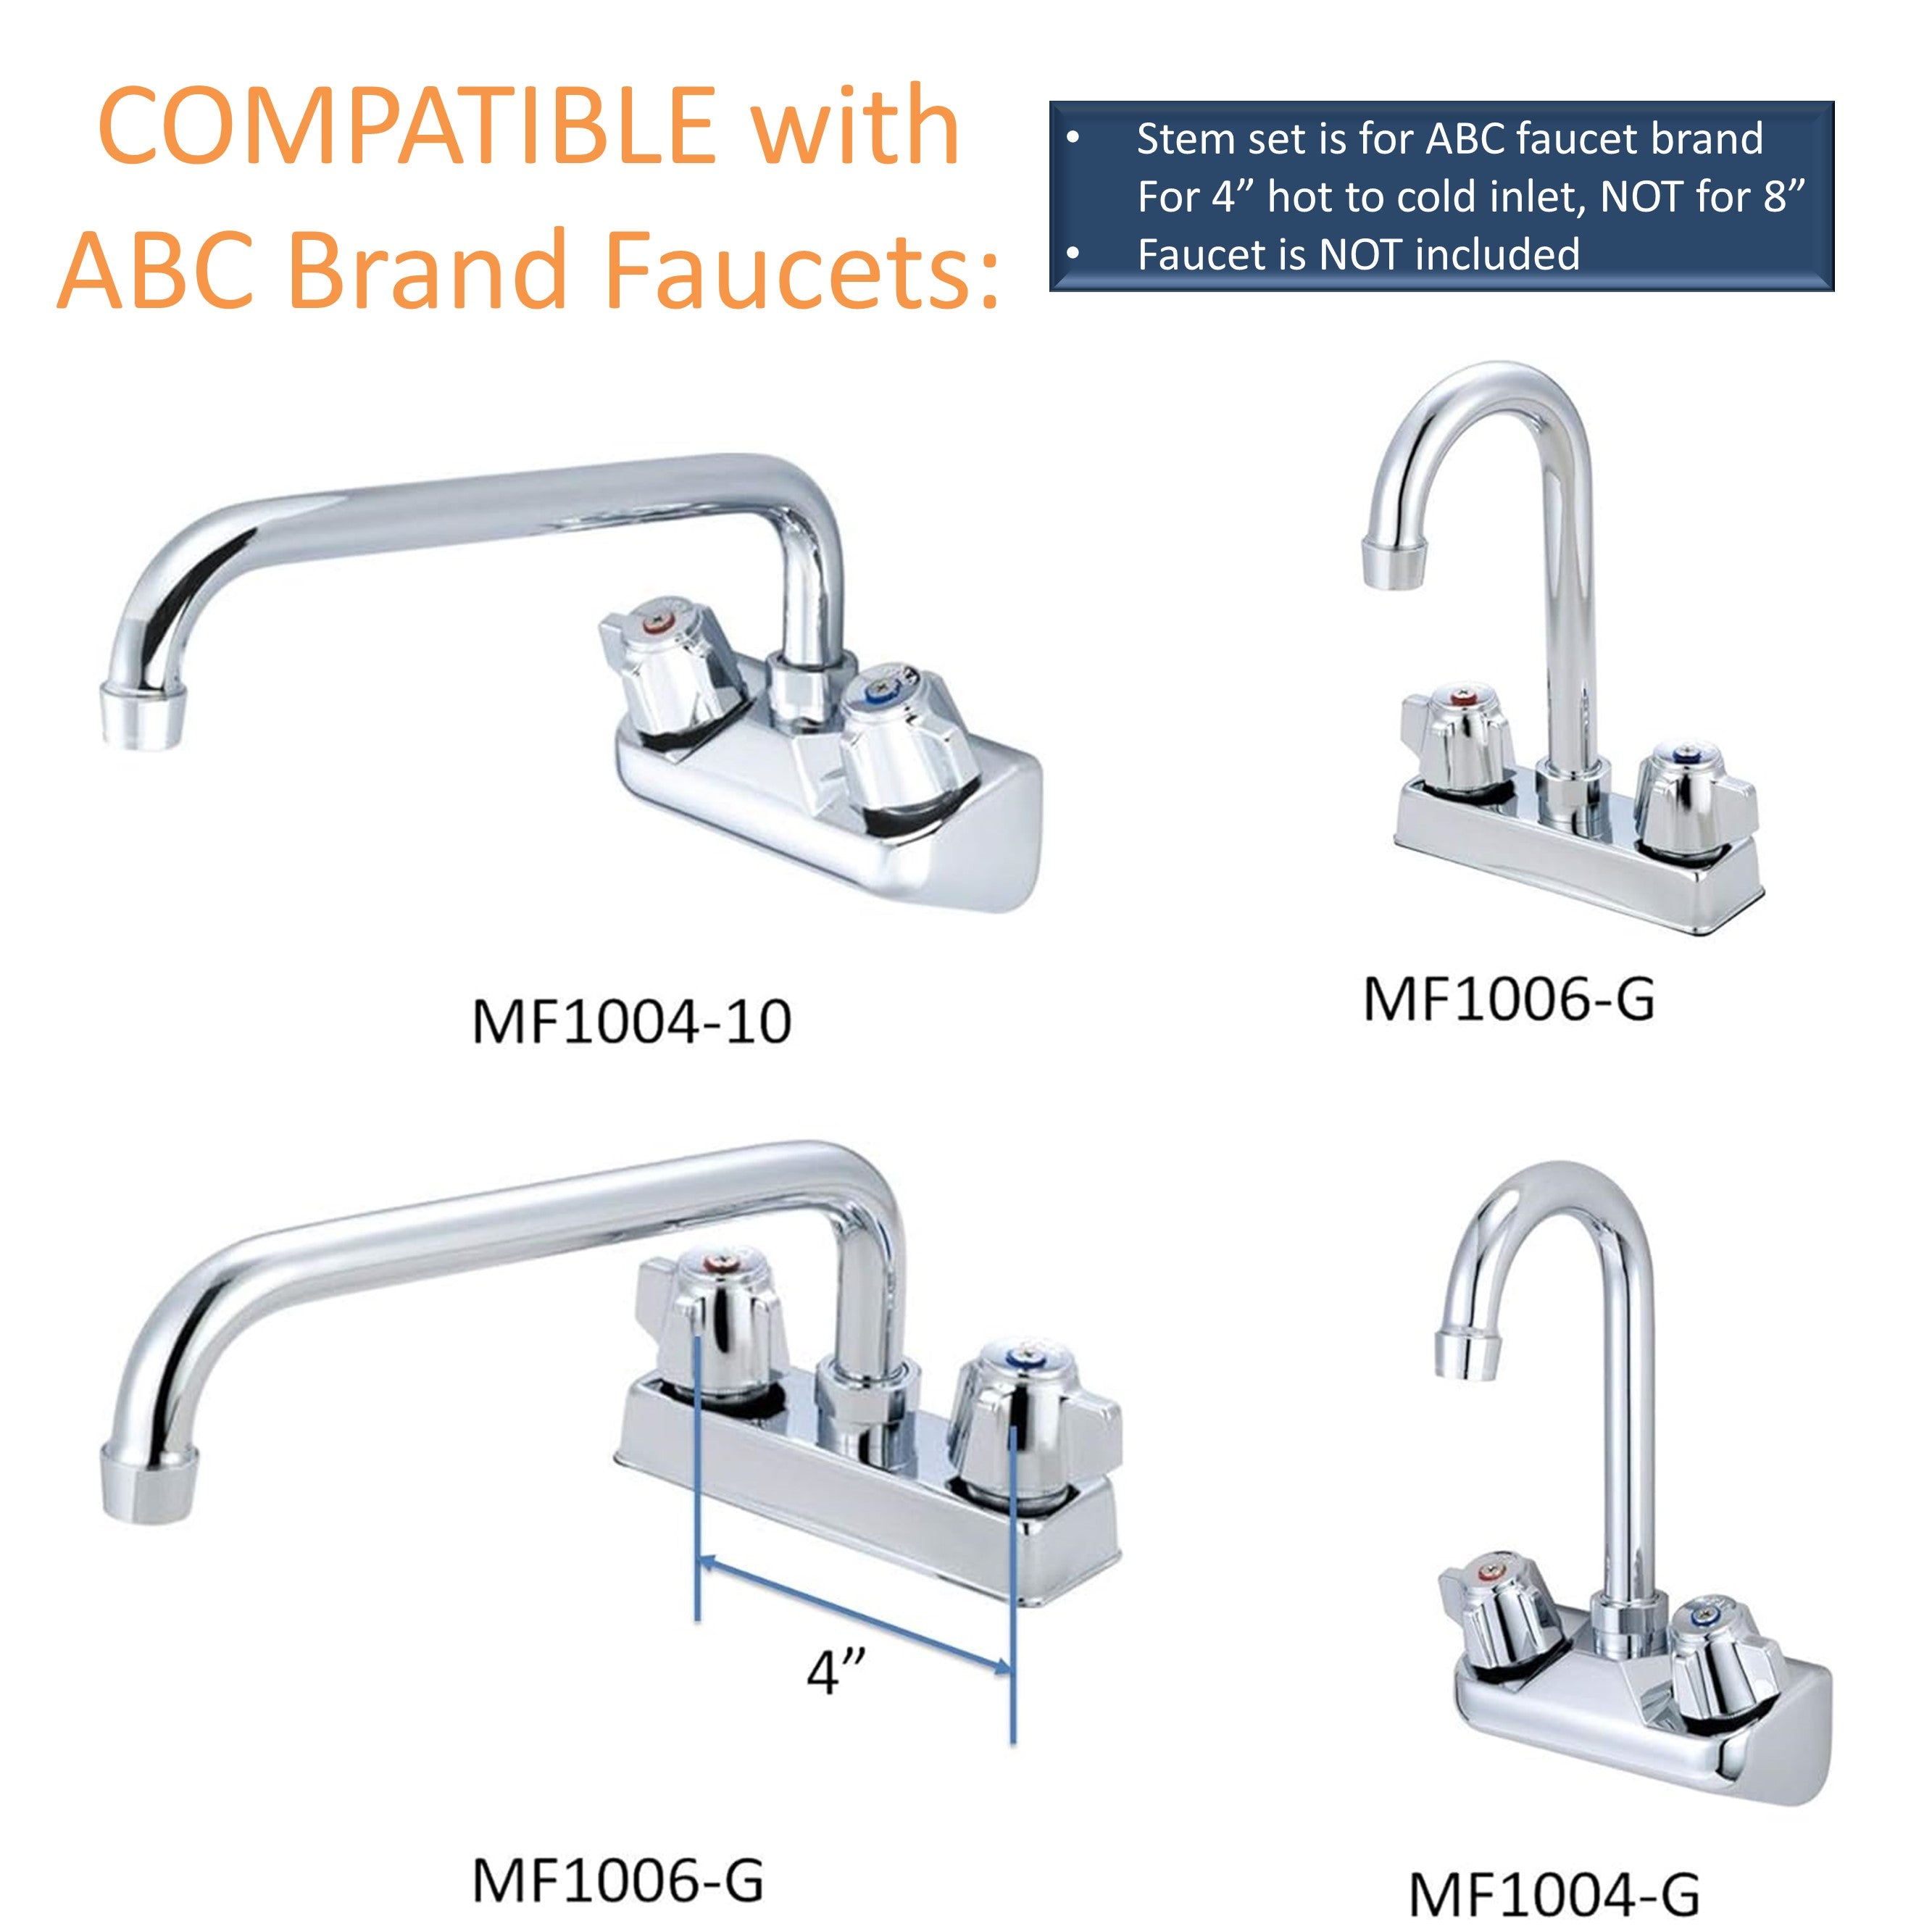 ABC Cold Knob Handle Kit with Stem for ABC 4" Hand Sink Faucet, Twist Counter-Clockwise to Open